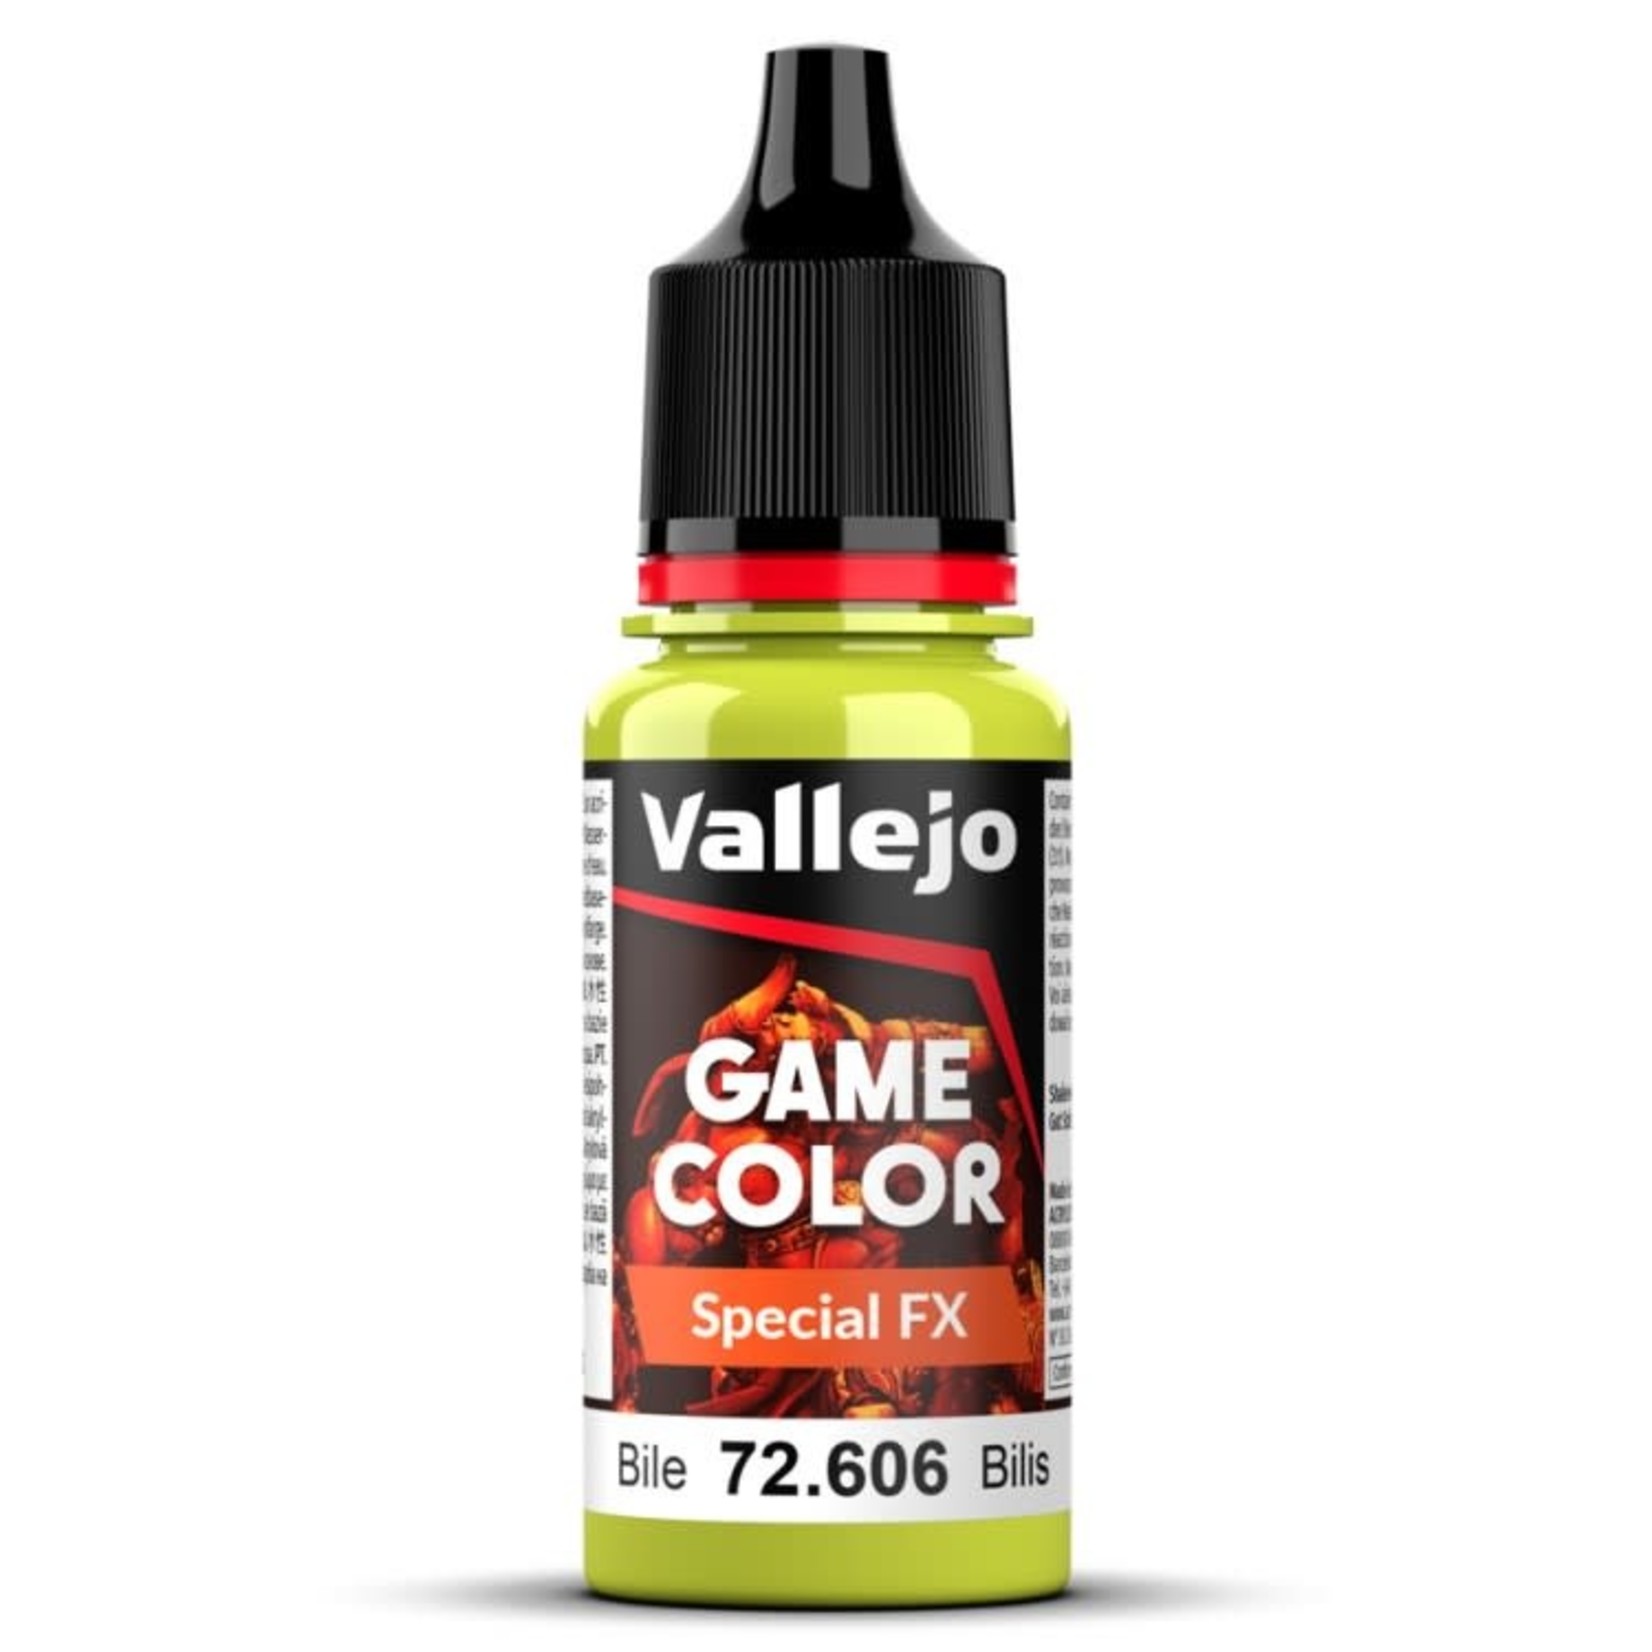 Vallejo Paint: Game Color, Special FX (Bile)